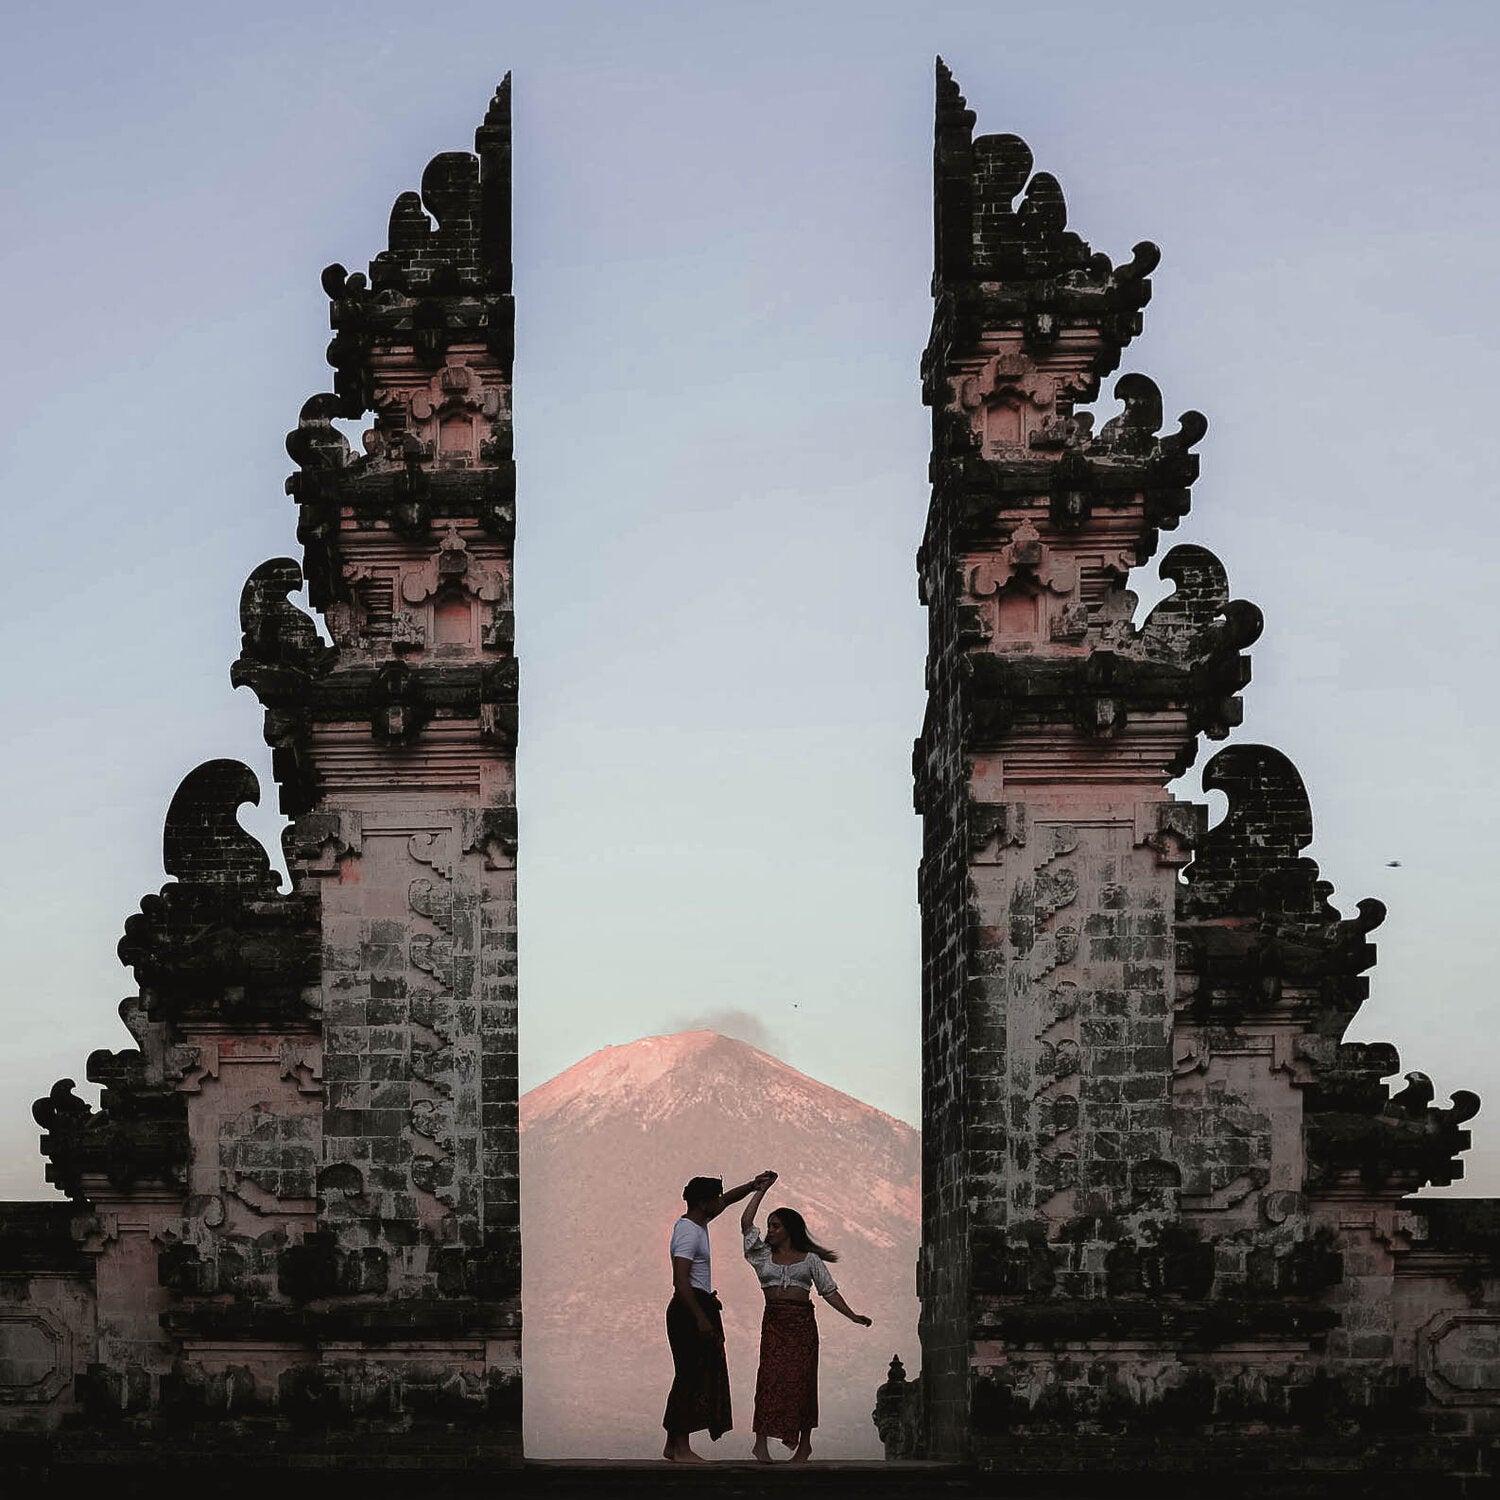 Lost LeBlanc and What the Chic at the Gates of heaven, Lempuyang Temple, Bali